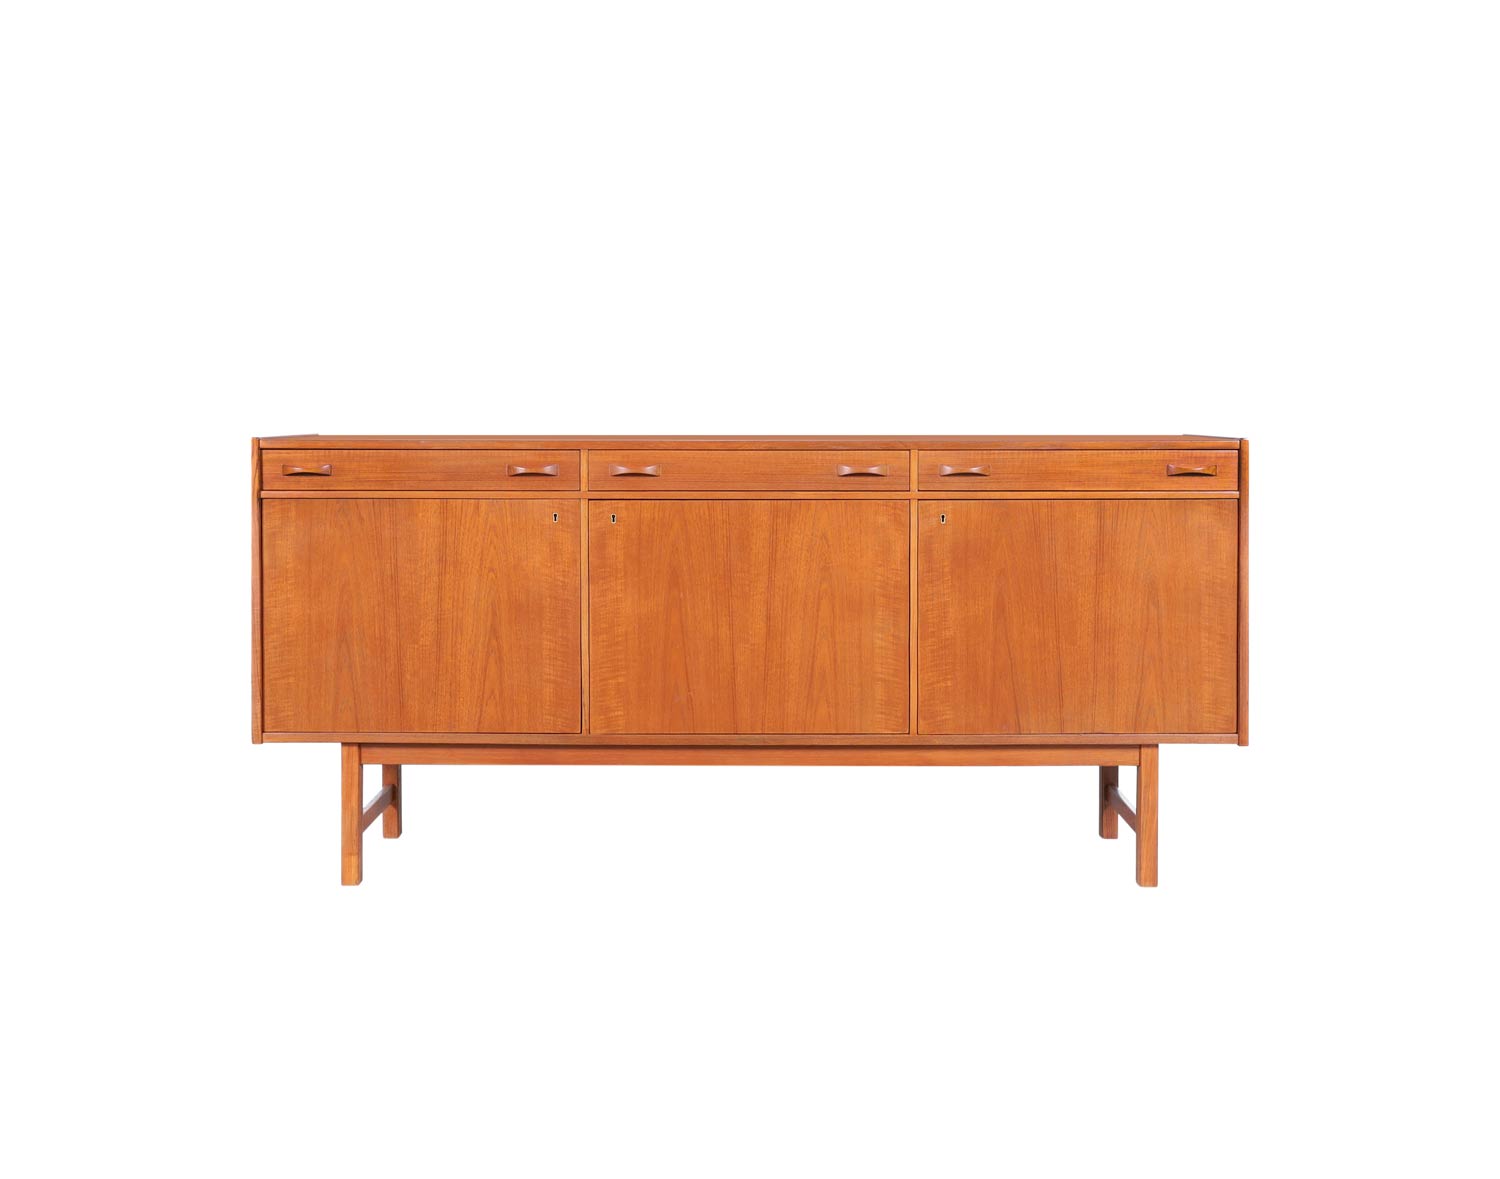 Swedish Teak Credenza by Tage Olofsson for Ulferts Mobler